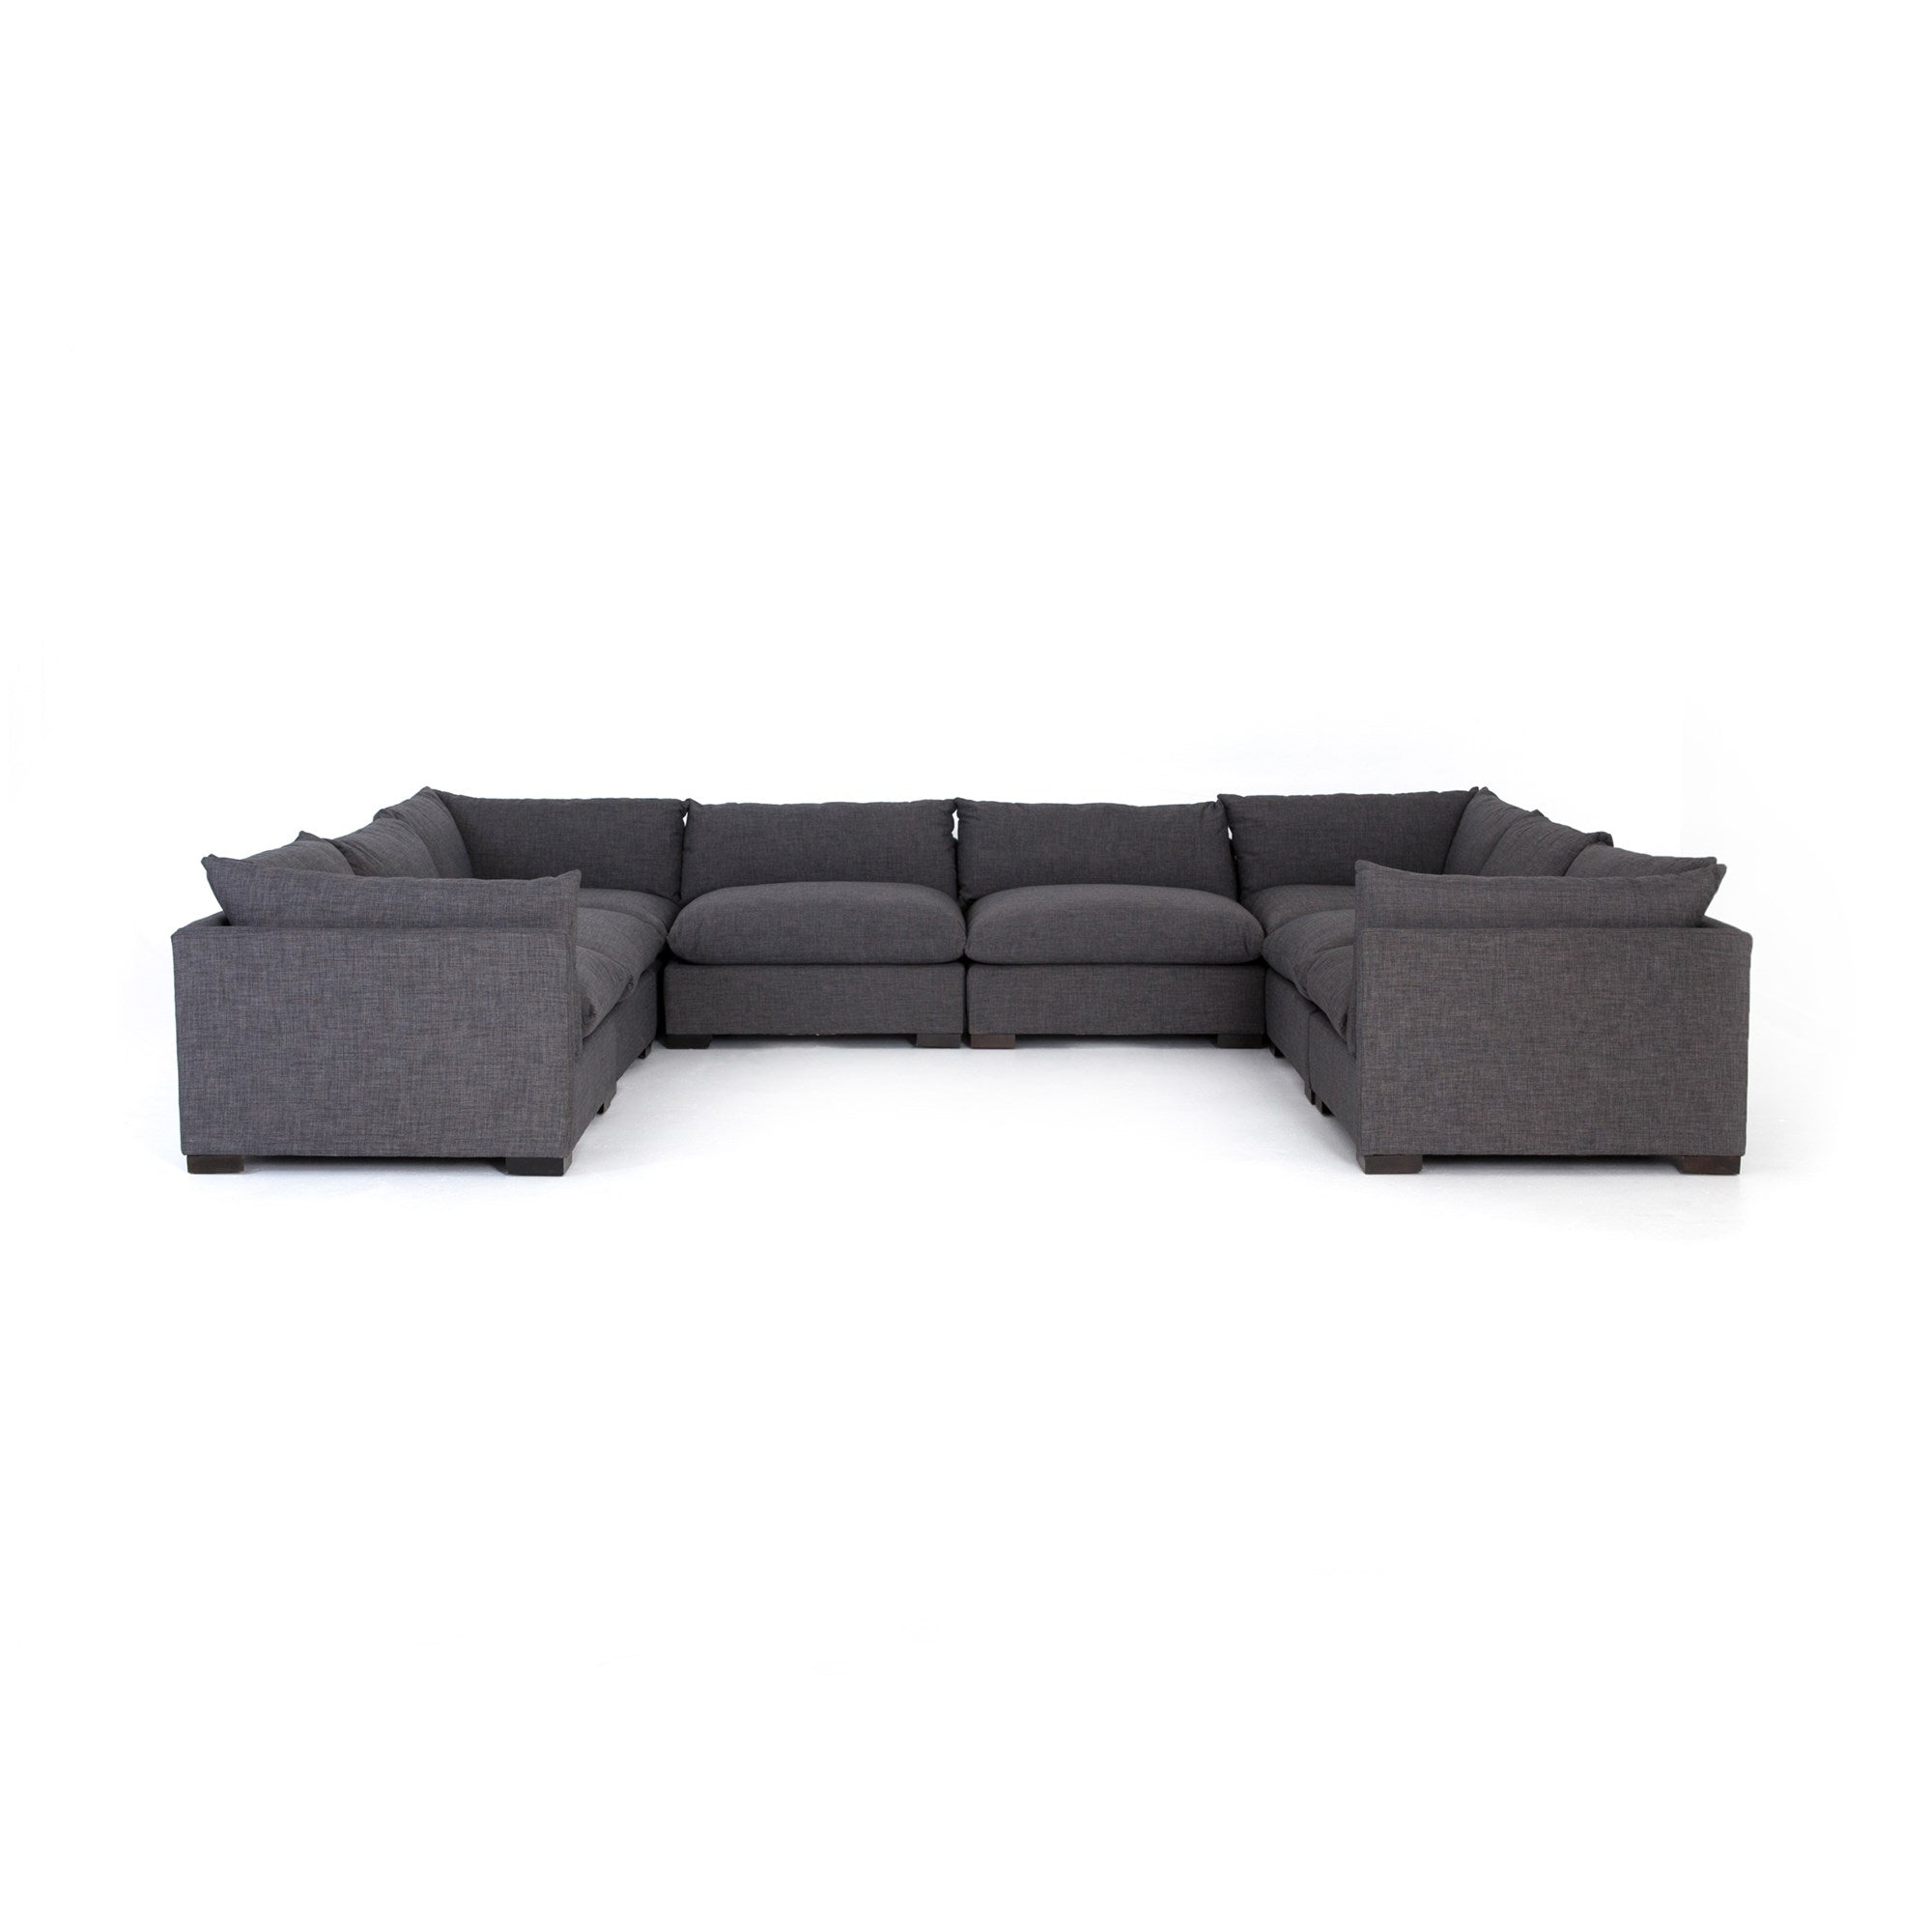 Westwood 8 Piece Sectional